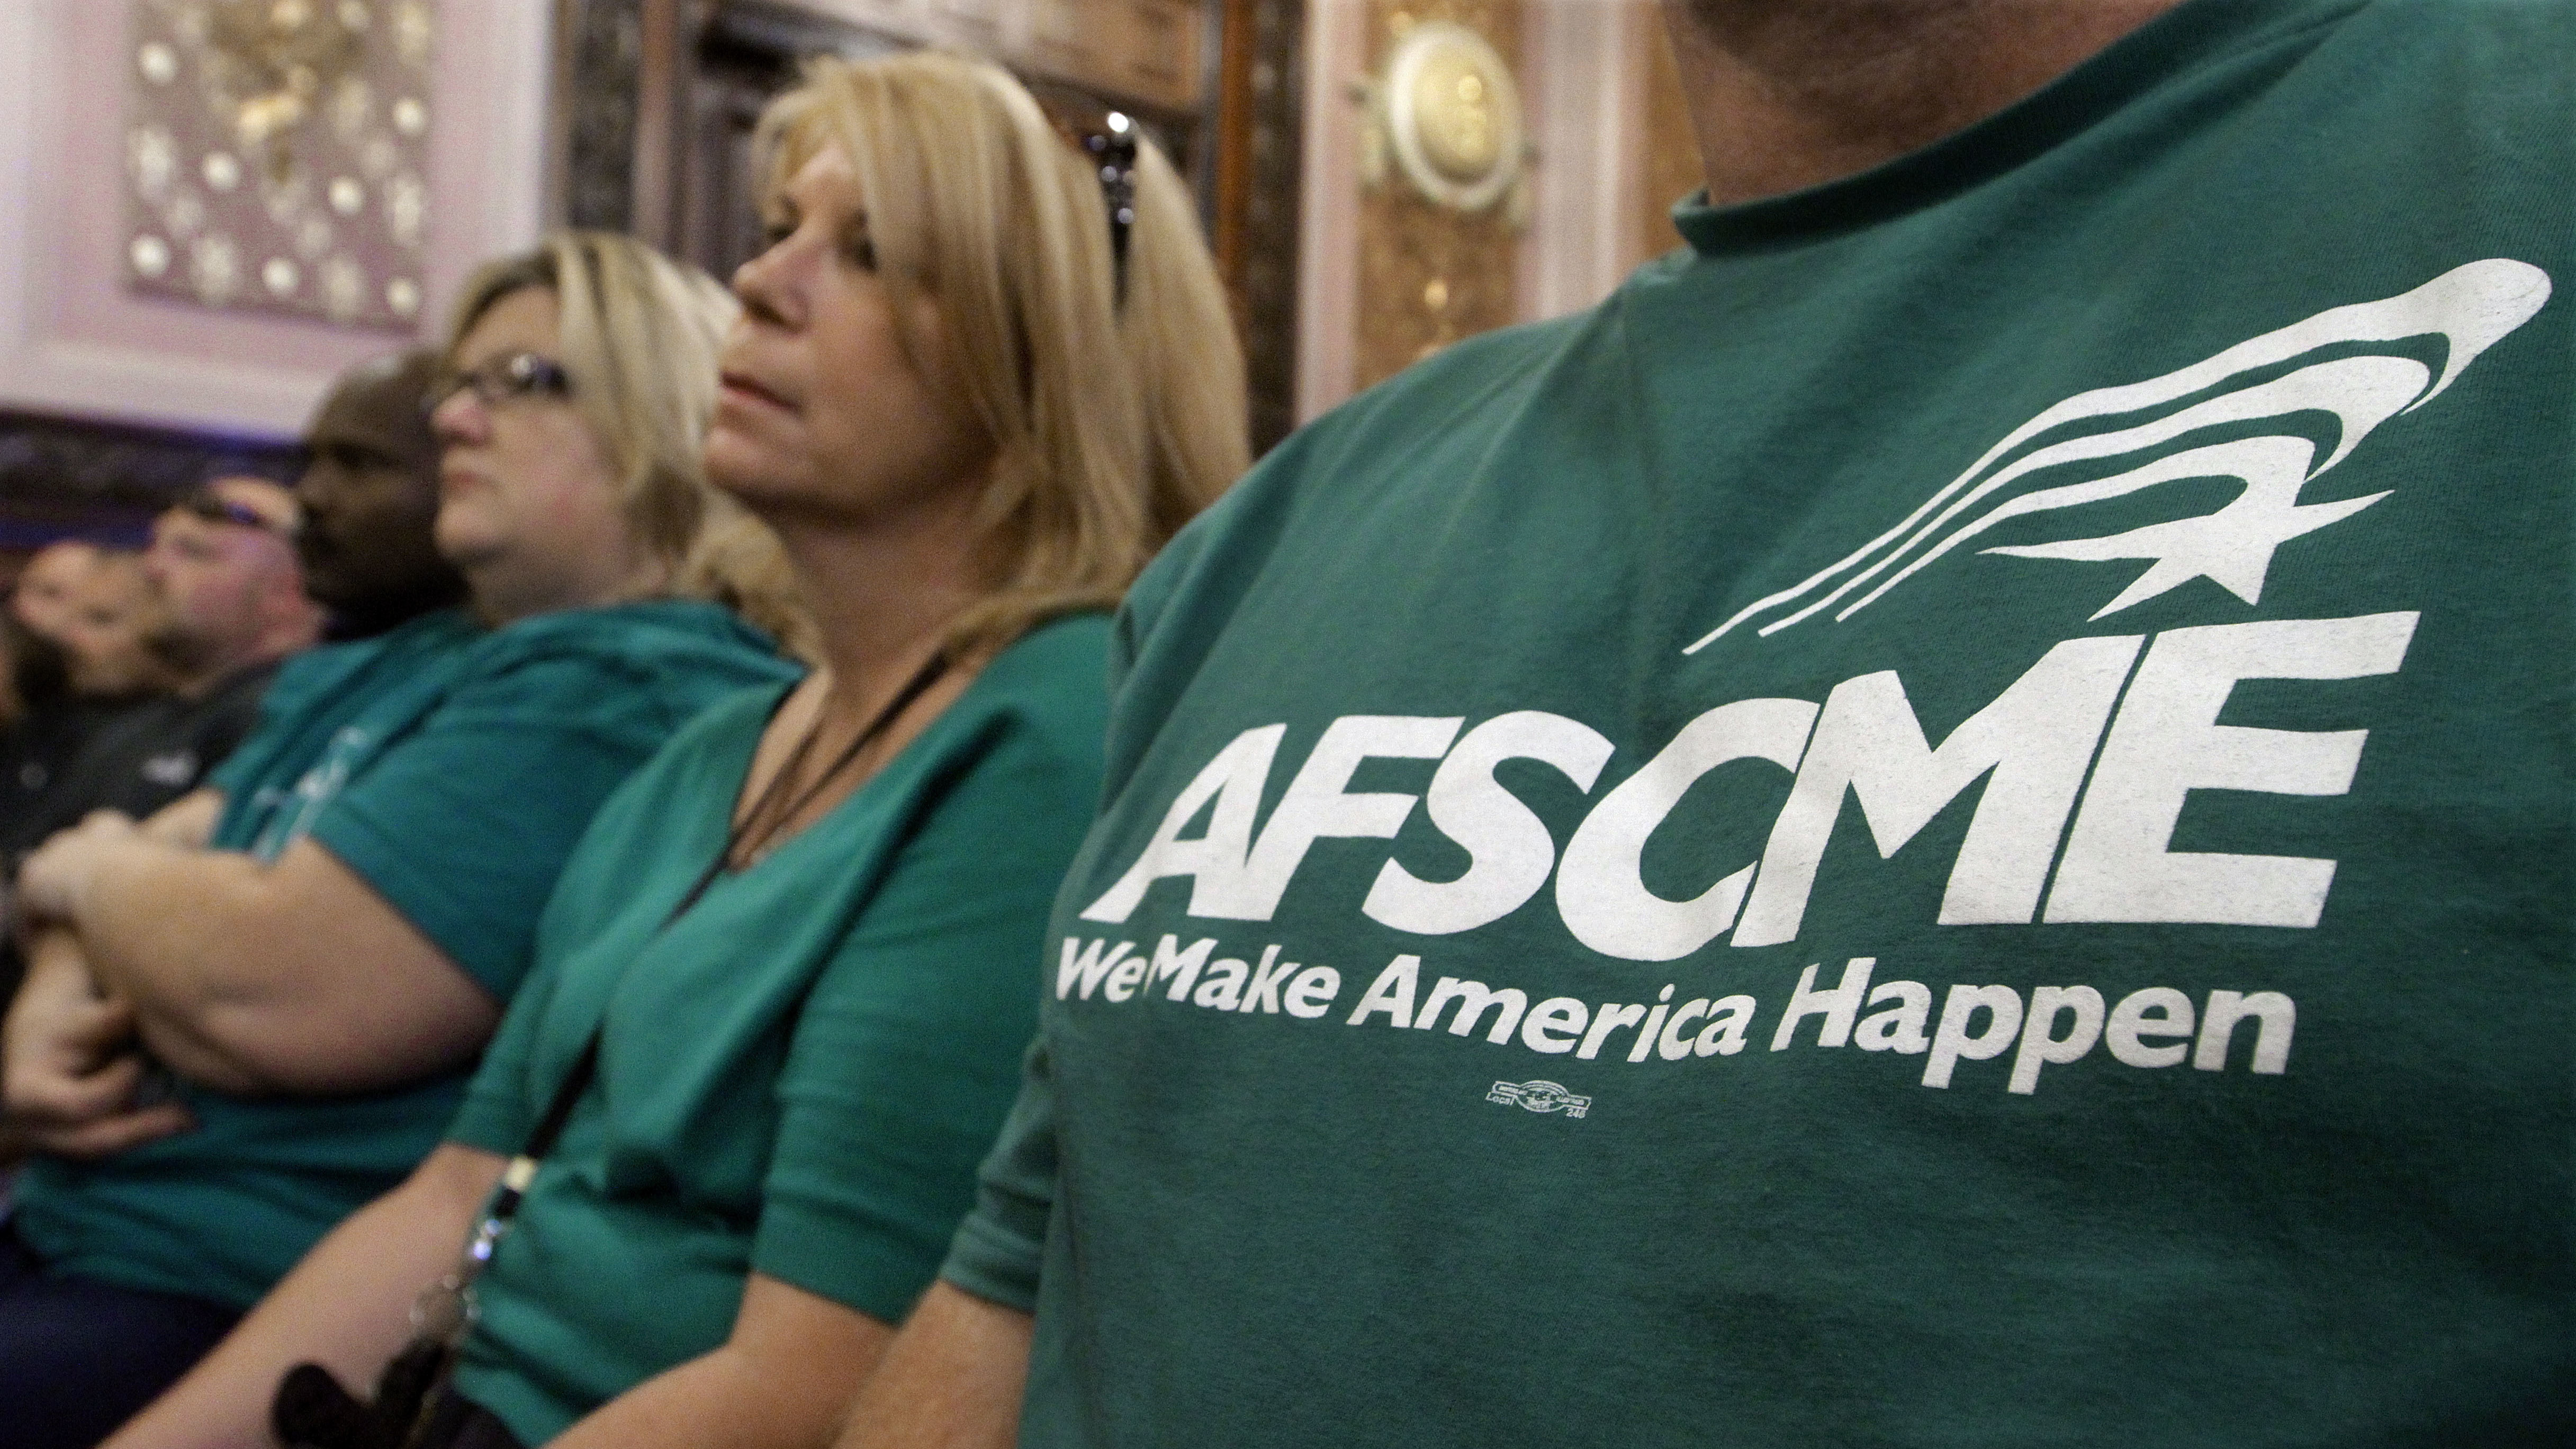 Members of the American Federation of State County and Municipal Employees union, or AFSCME, listen to a council executive speak about conditions at state prisons and detention centers in Illinois.
